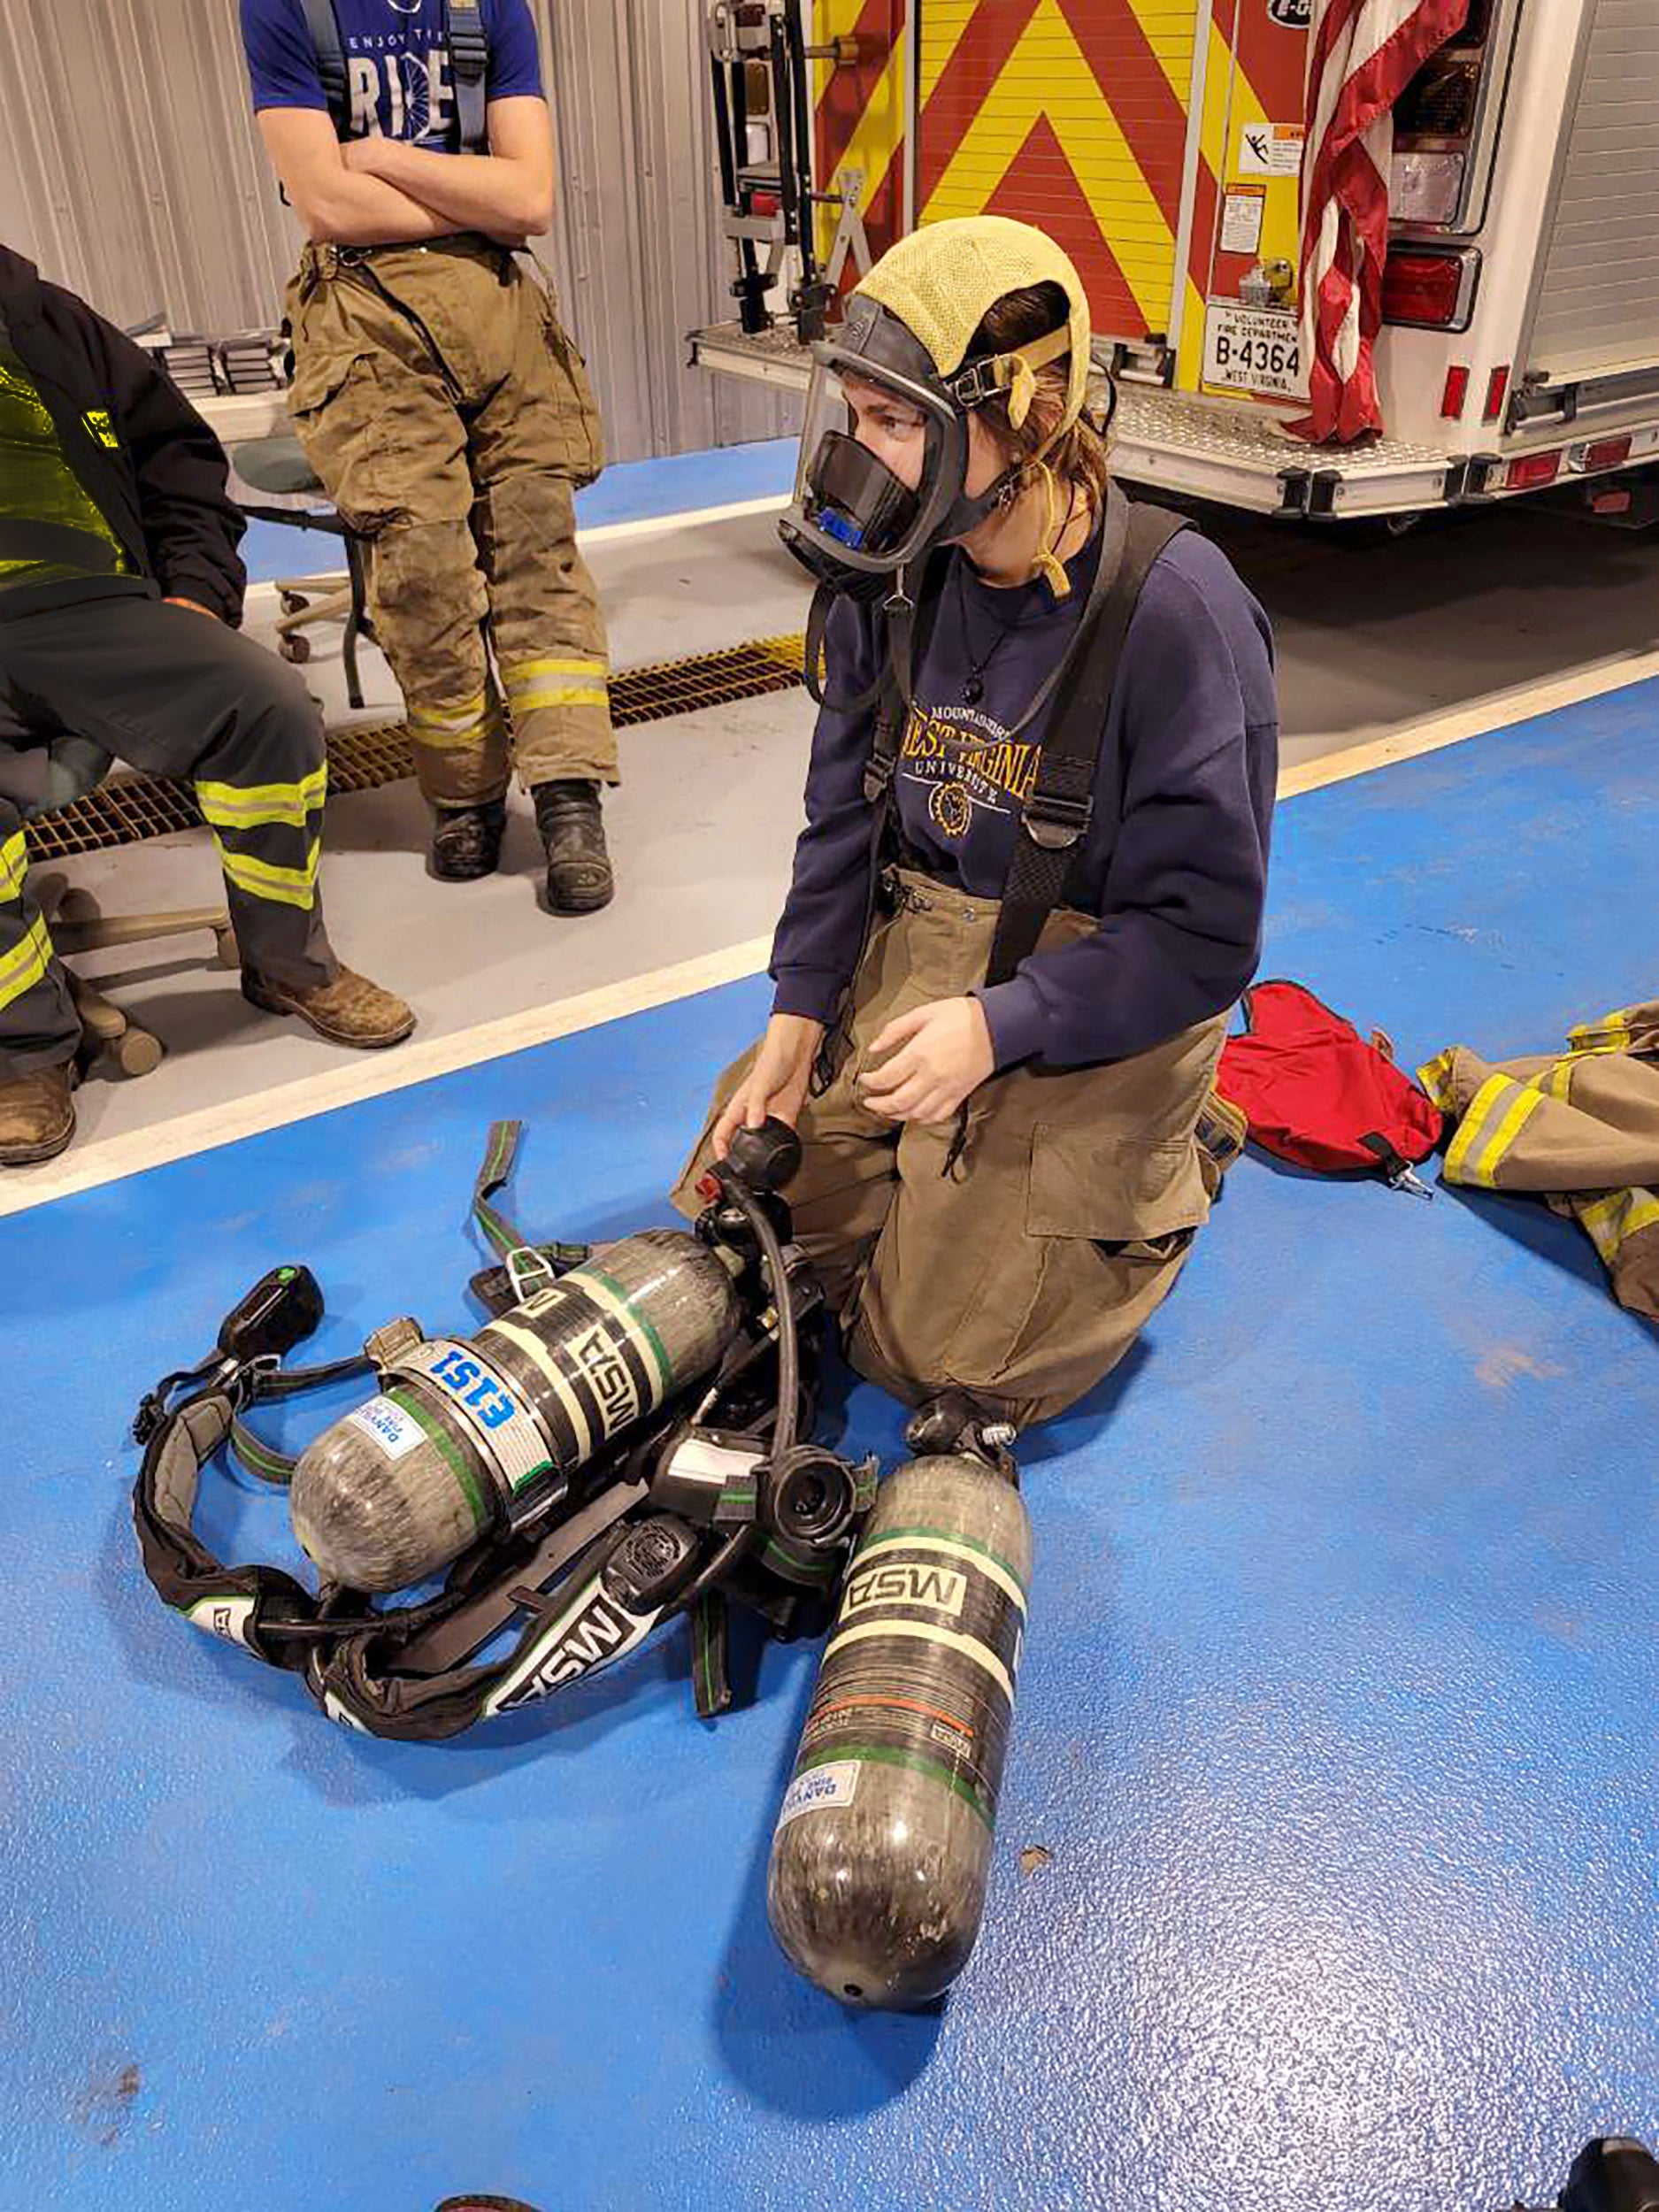 Demonstrating equipment at the fire department.